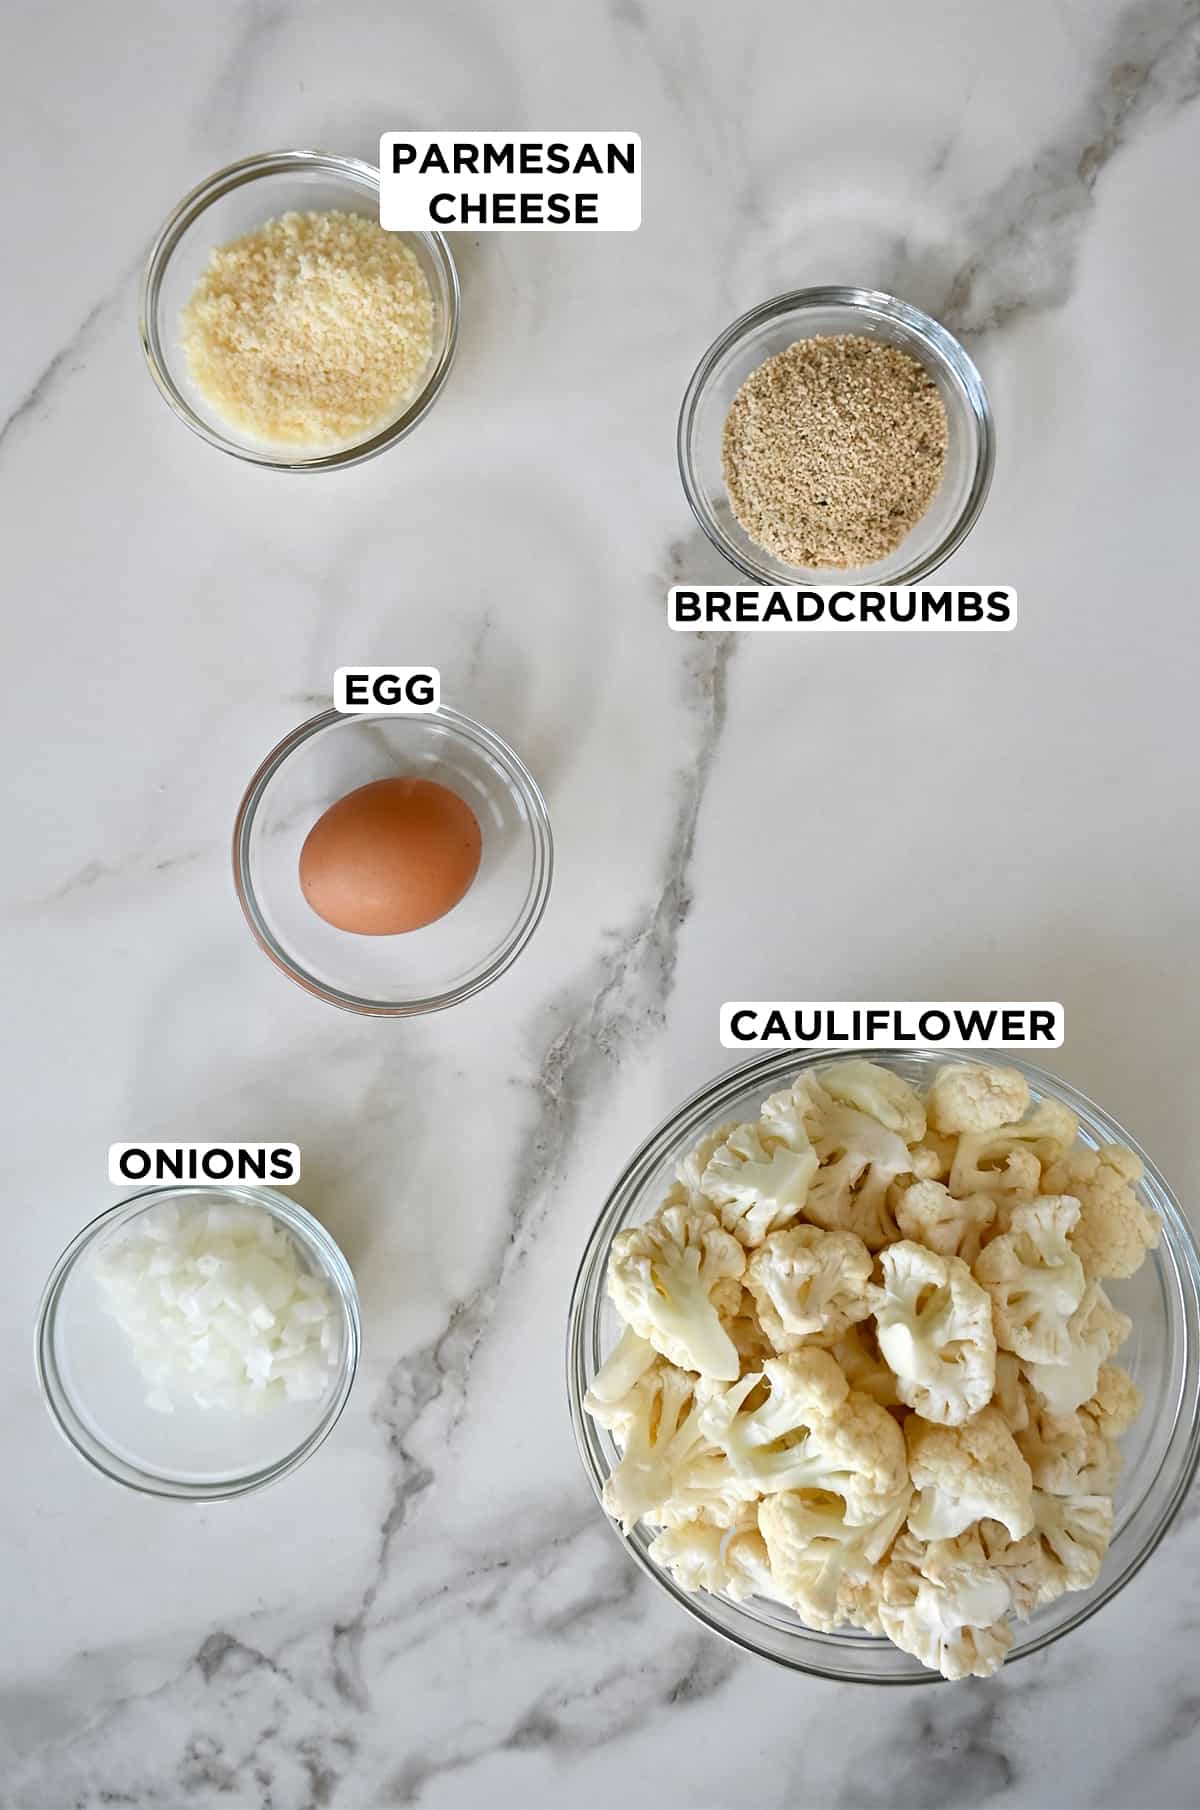 Various sizes of clear glass bowls containing grated Parmesan cheese, breadcrumbs, cauliflower florets, diced white onions and an egg.